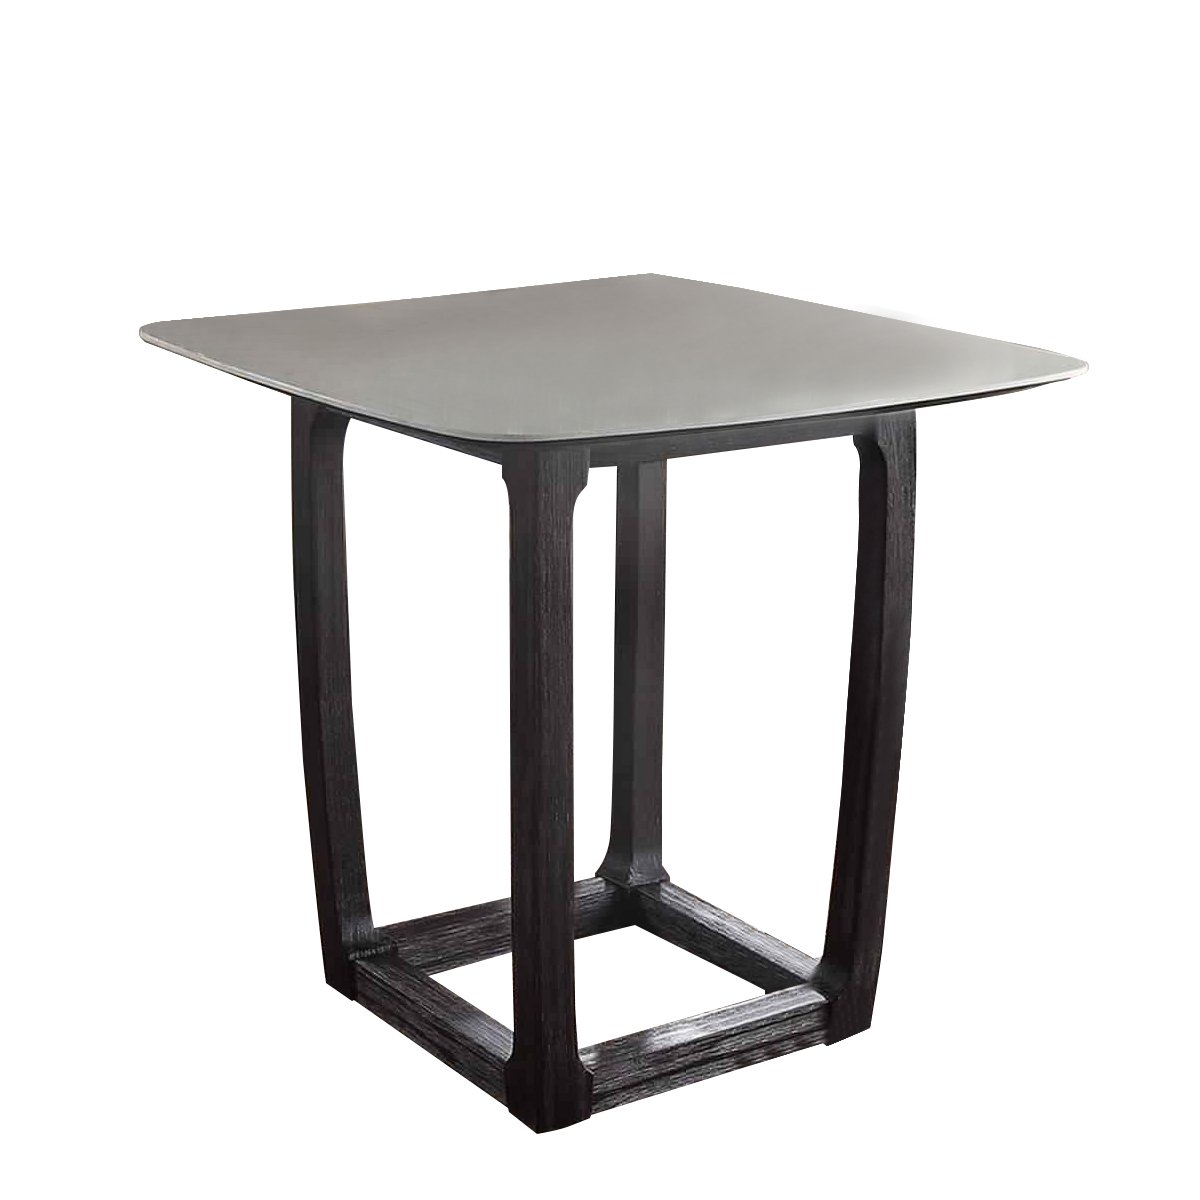 Square Marble Top Counter Height Wooden Table With Sled Base, Gray- Saltoro Sherpi